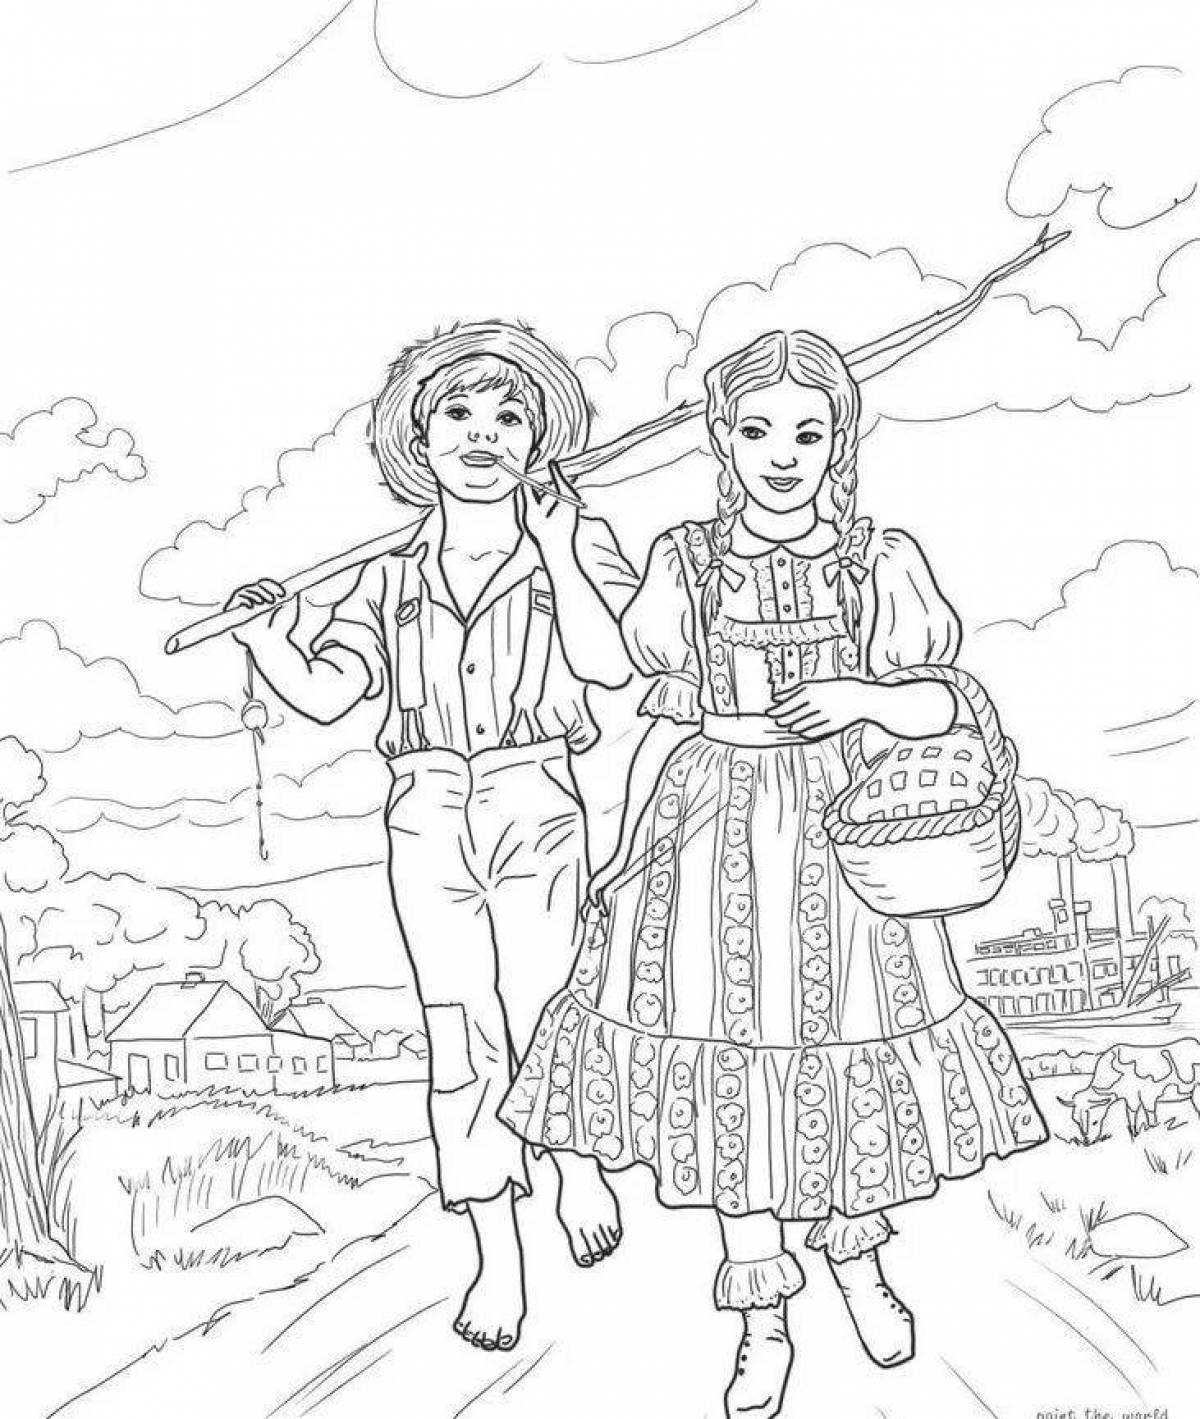 Photo Tom sawyer's awesome coloring book